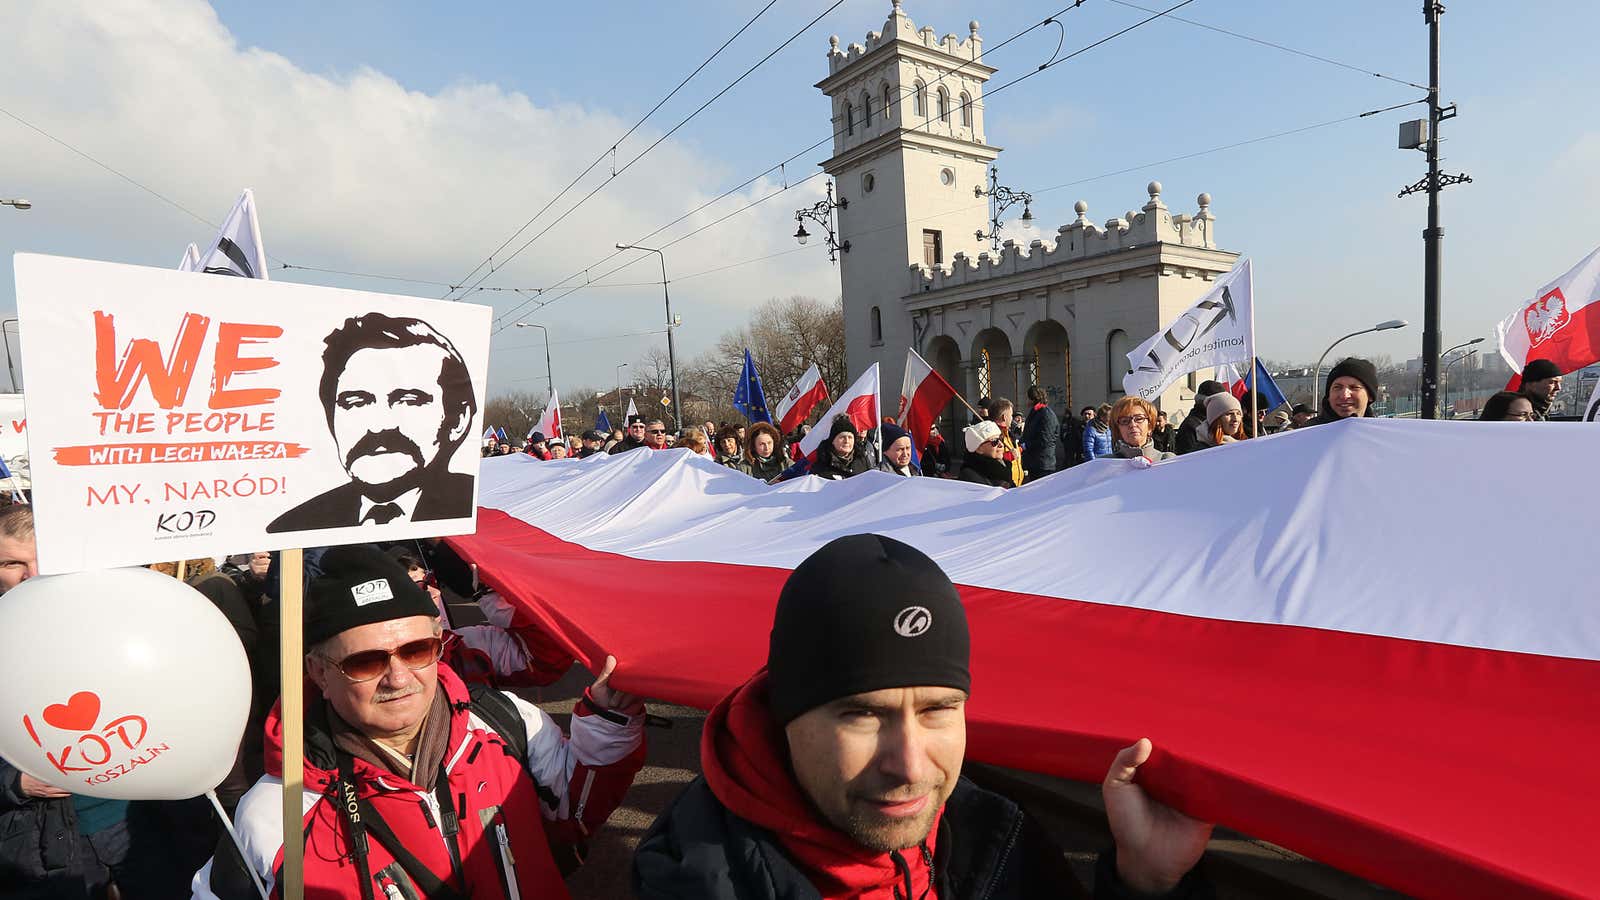 Poles marched under a familiar slogan: “We the People.”